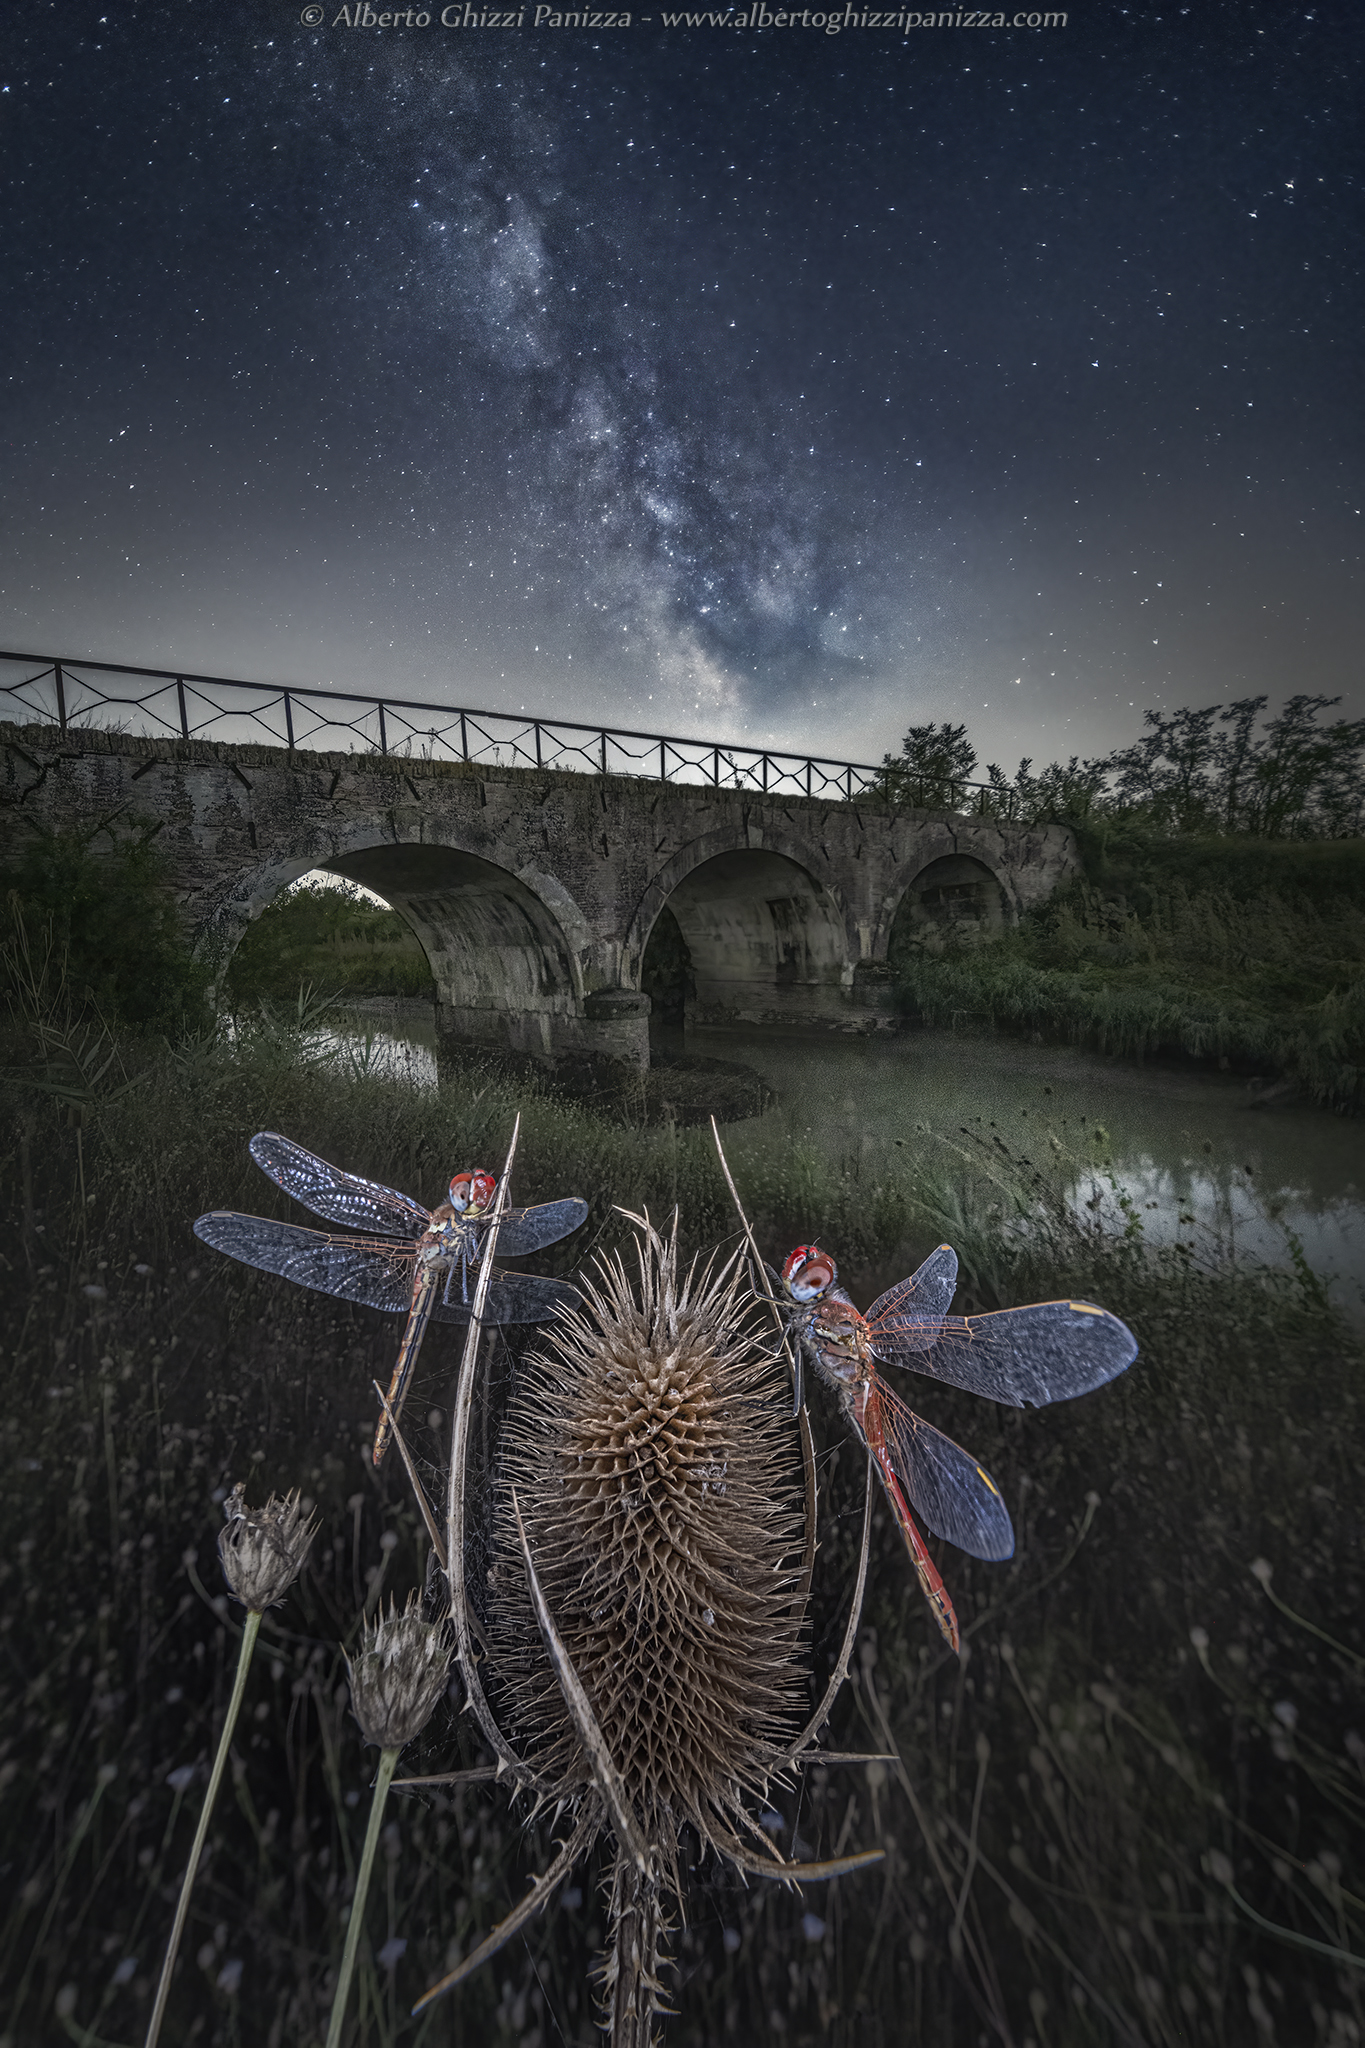 Dragonflies rest at night...